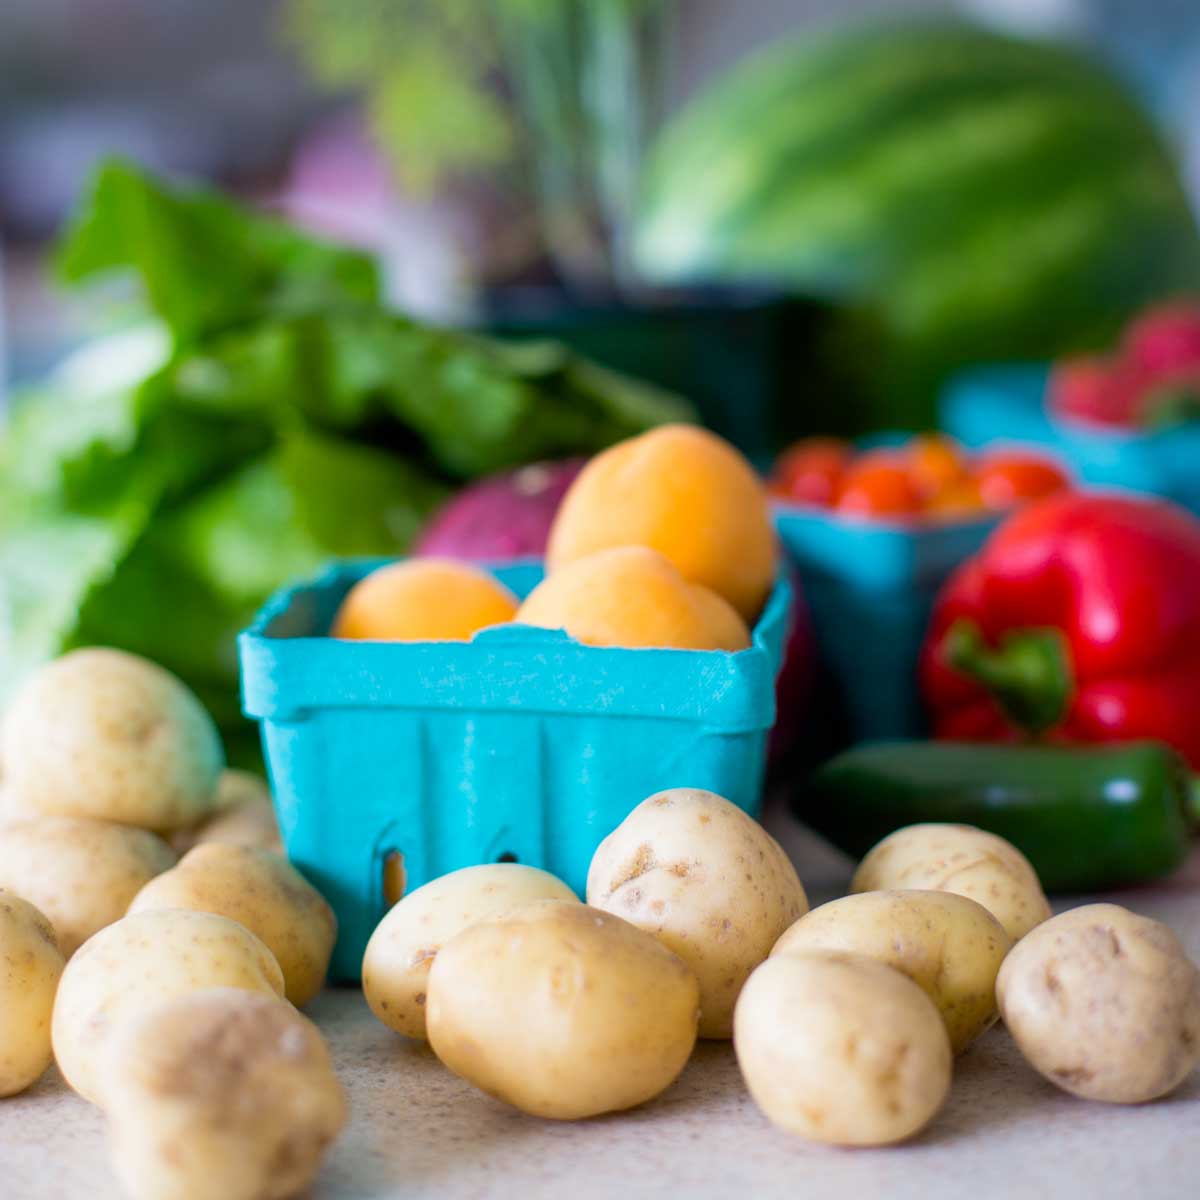 A mix of fresh vegetables from the market are on a kitchen counter: potatoes, tomatoes, peppers, spinach, jalapeno, and a watermelon in the back.